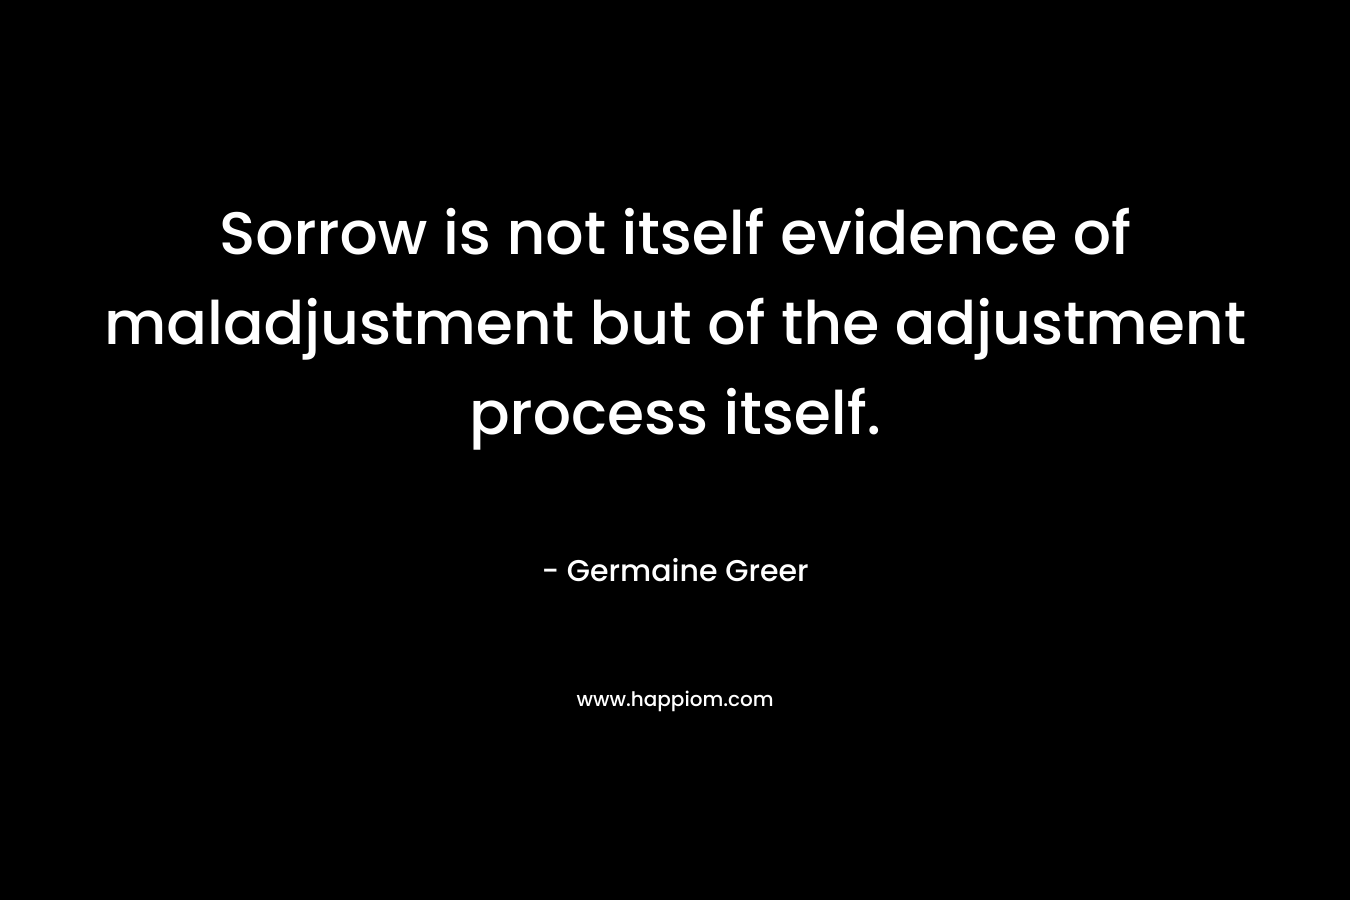 Sorrow is not itself evidence of maladjustment but of the adjustment process itself. – Germaine Greer